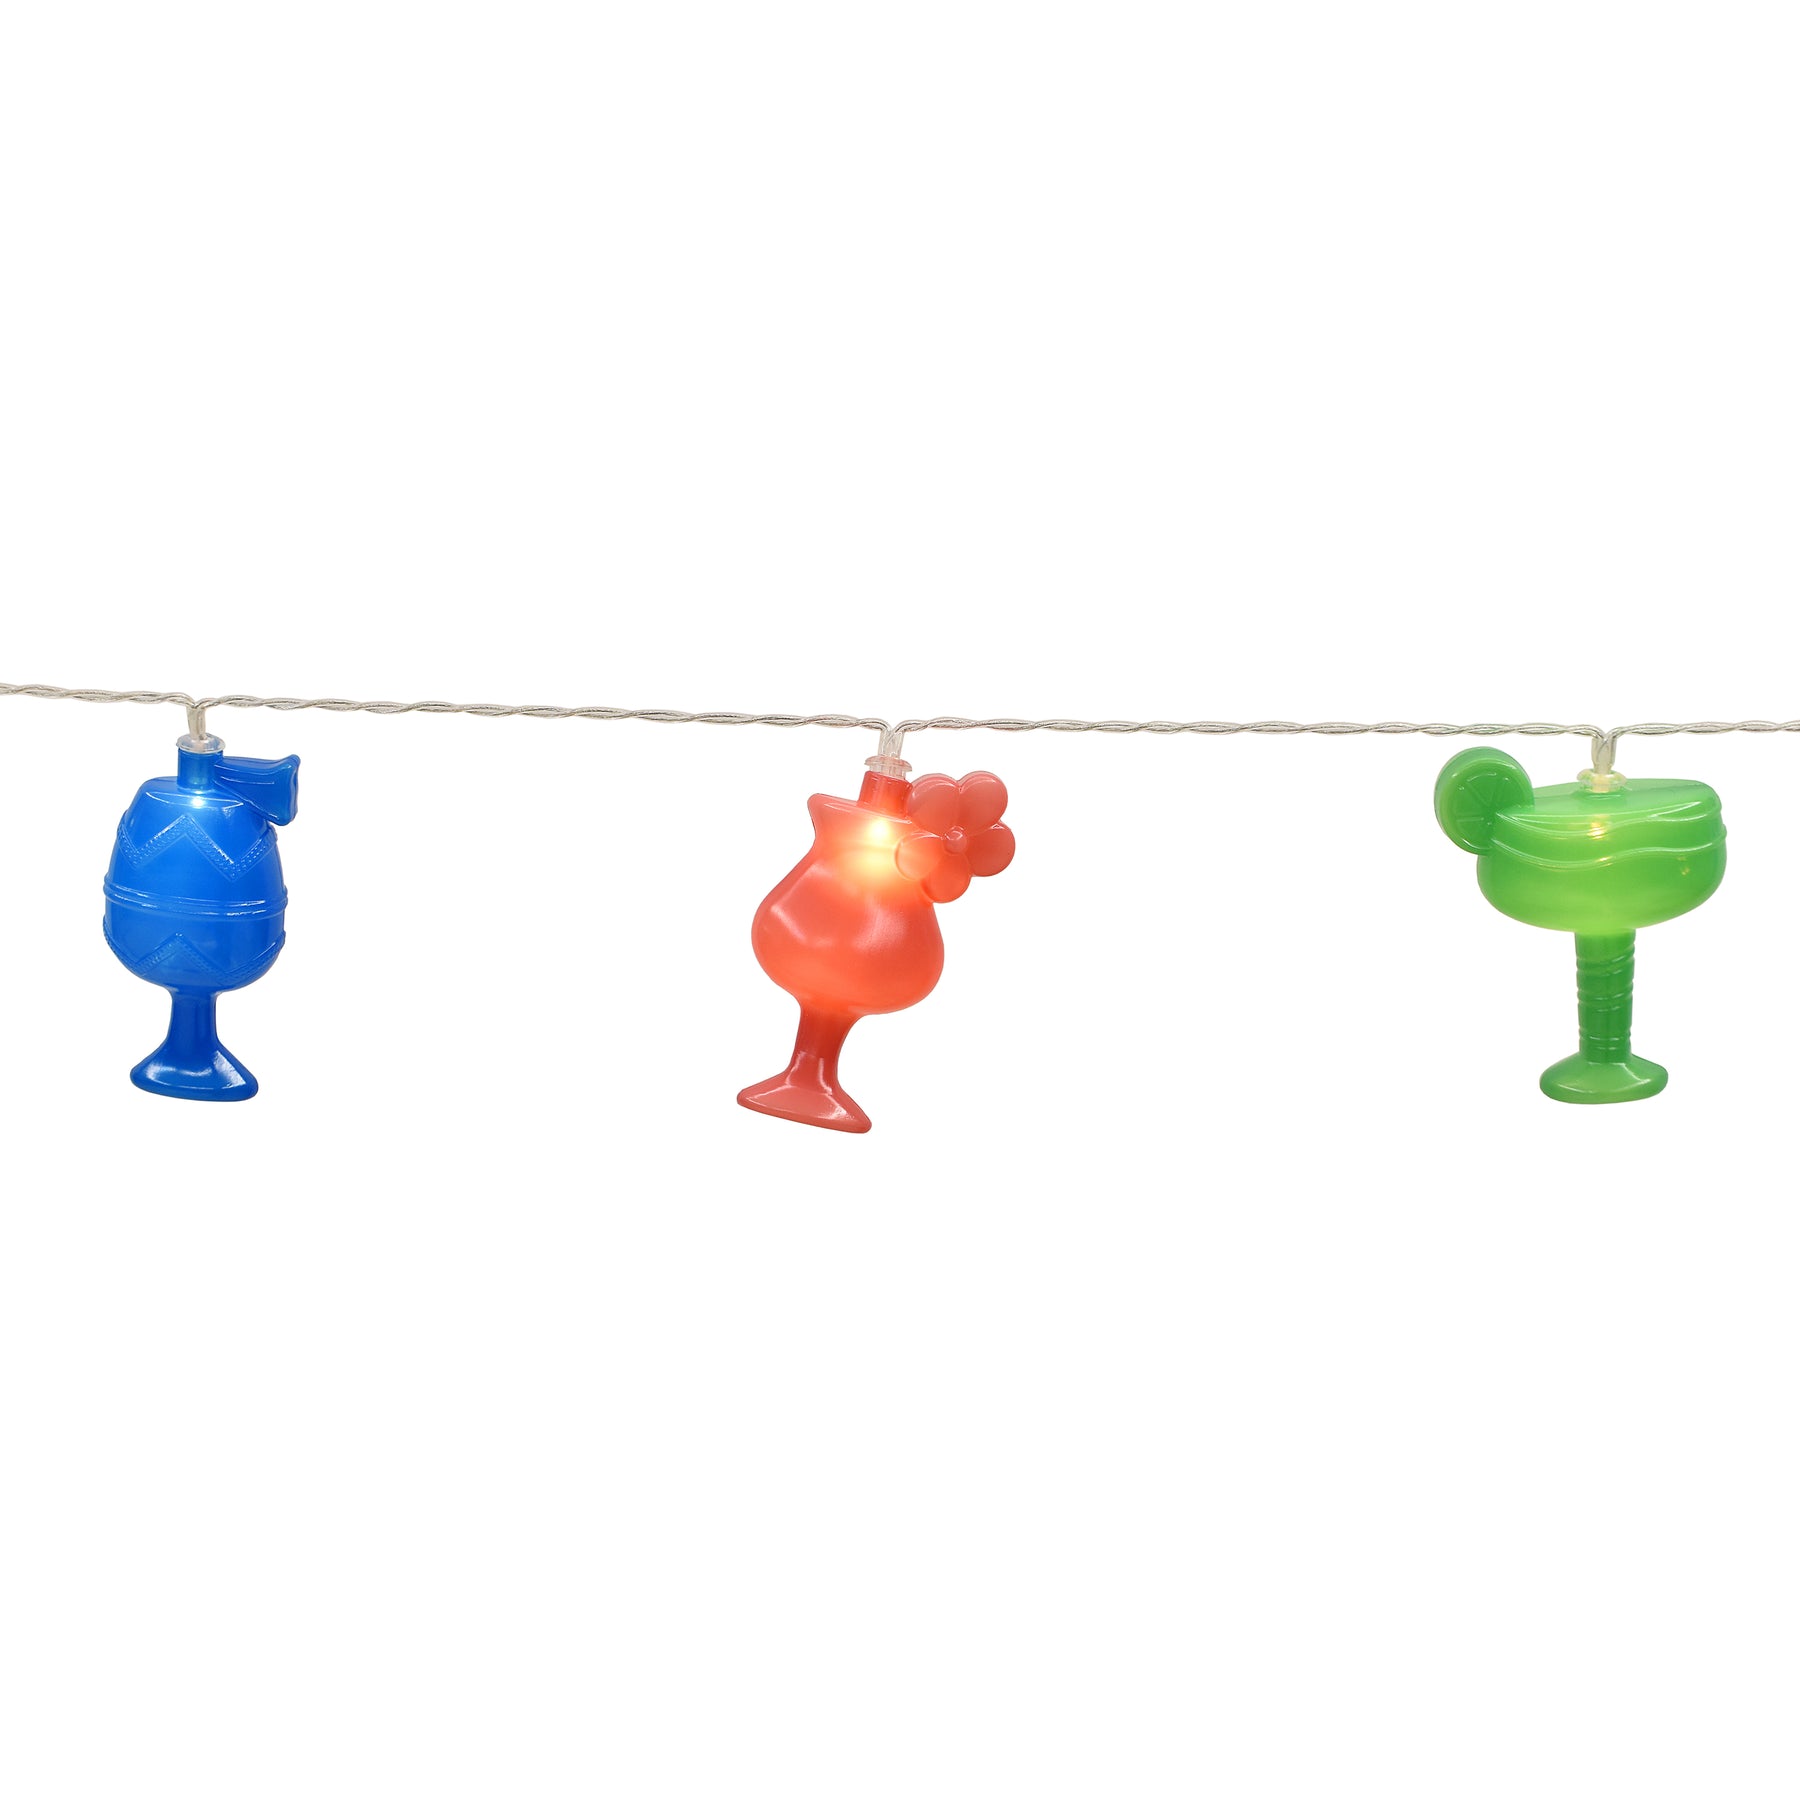 Themed String Lights w/ Hanging Clips | 12-Foot | 20 LEDs & Remote | 8 Lighting Modes w/ Timer | Waterproof IP44